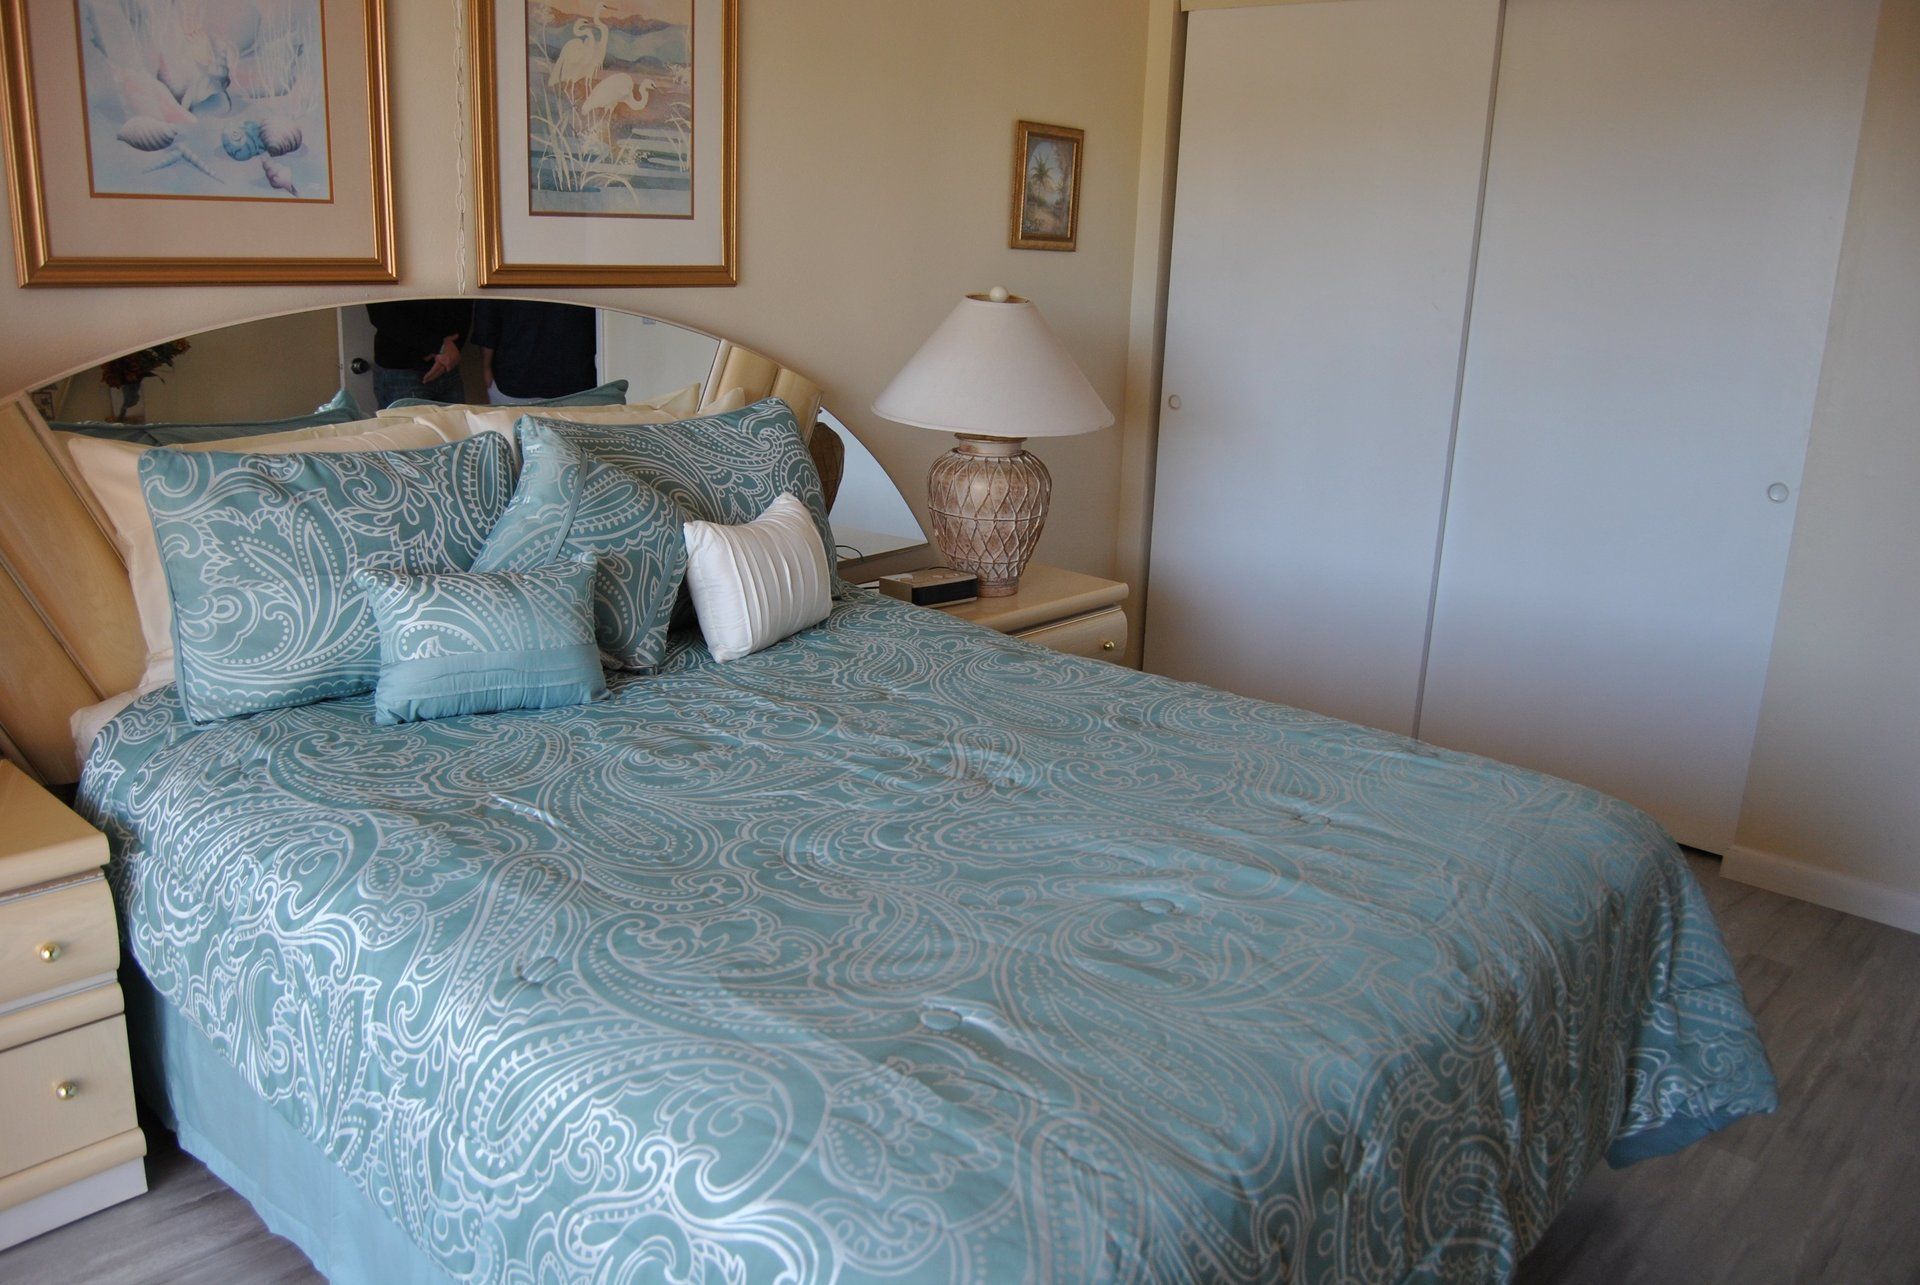 Queen bed with blue cover and 2 side tables